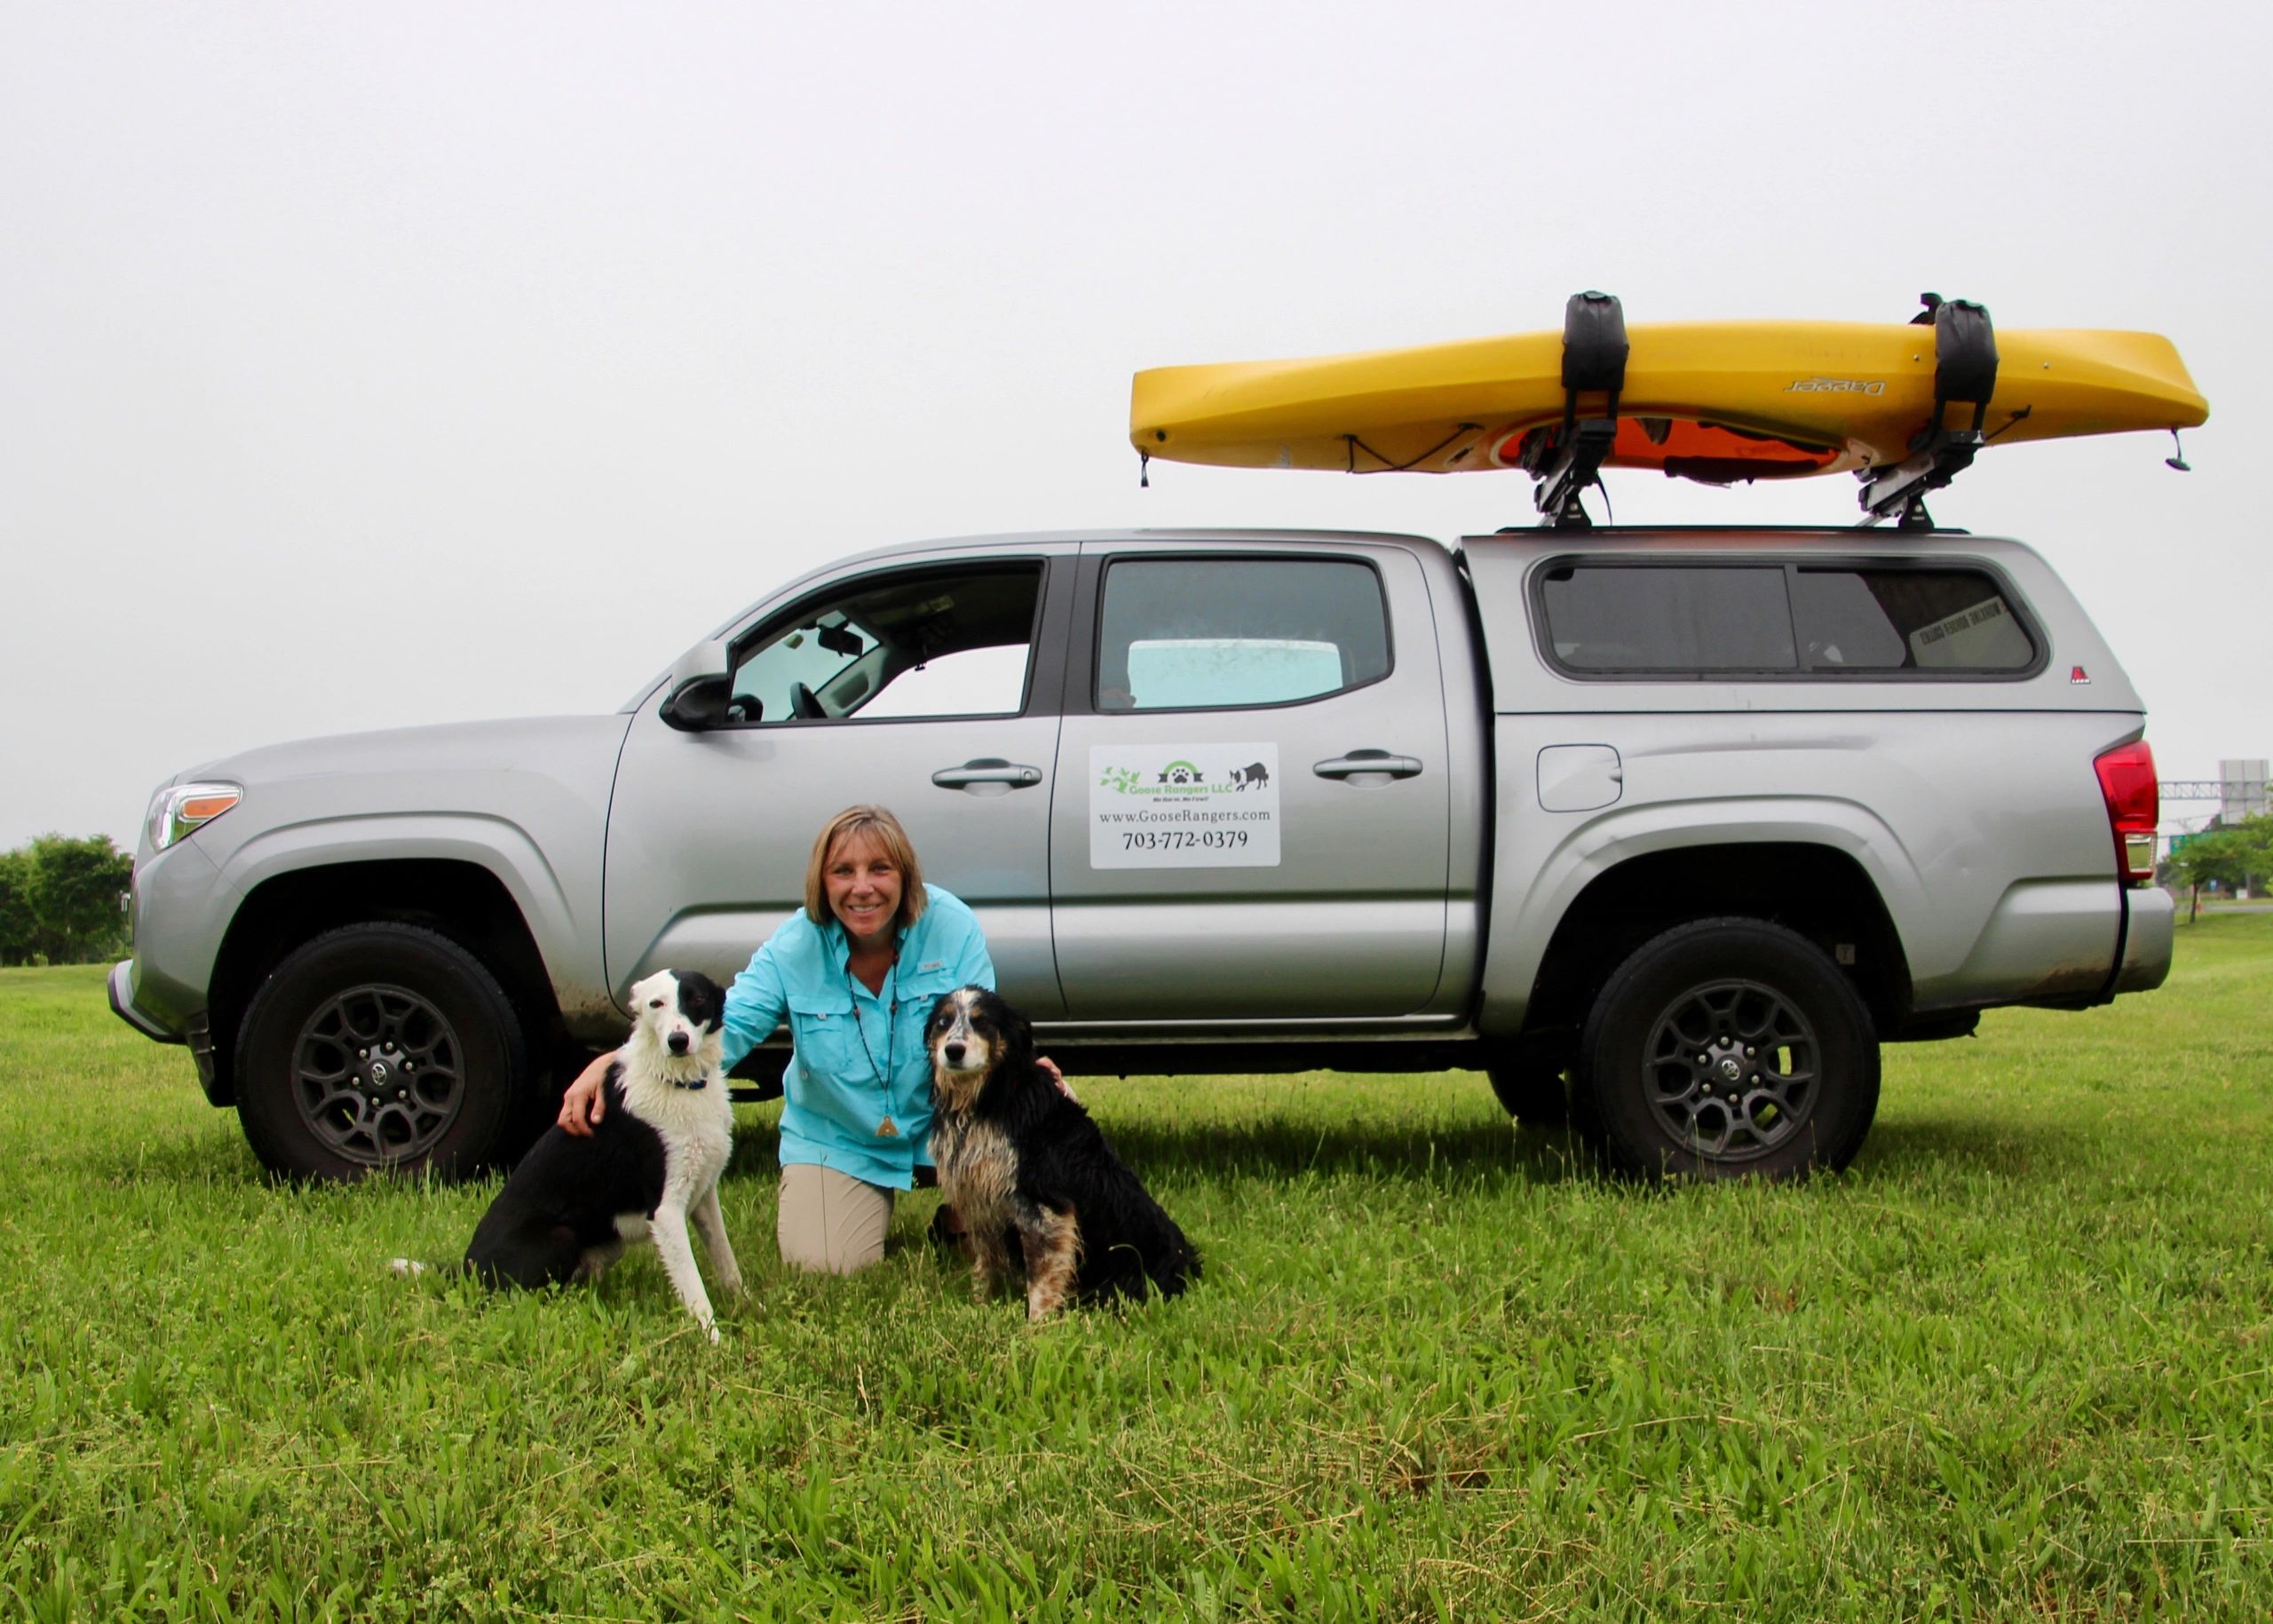 Goose Rangers located in Northern Virginia offers goose control using trained border collies.